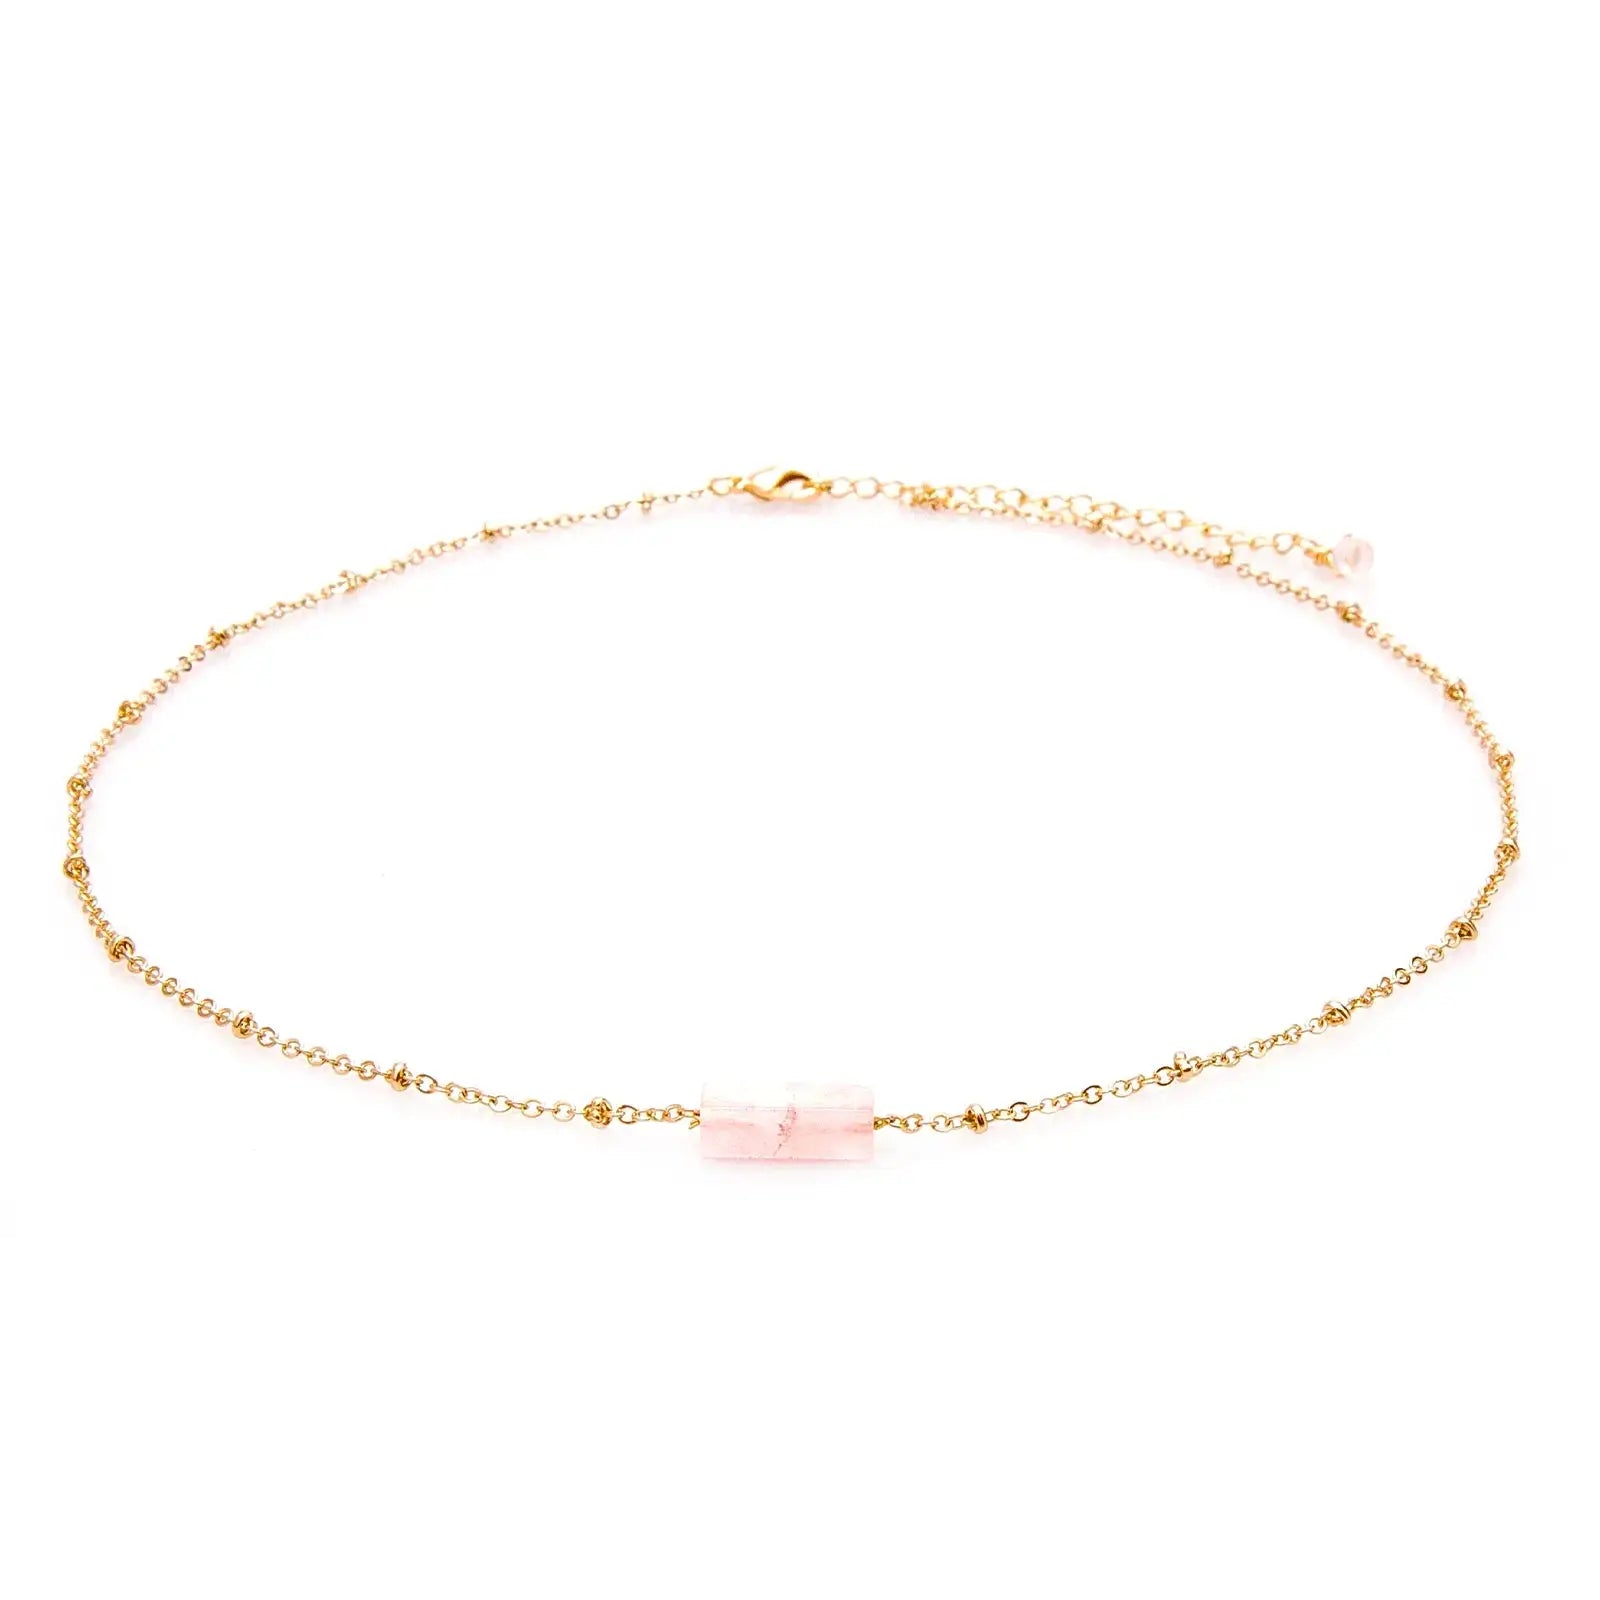 Raw Rose Quartz Stone on 18k yellow gold plated adjustable link chain with lobster claw closure